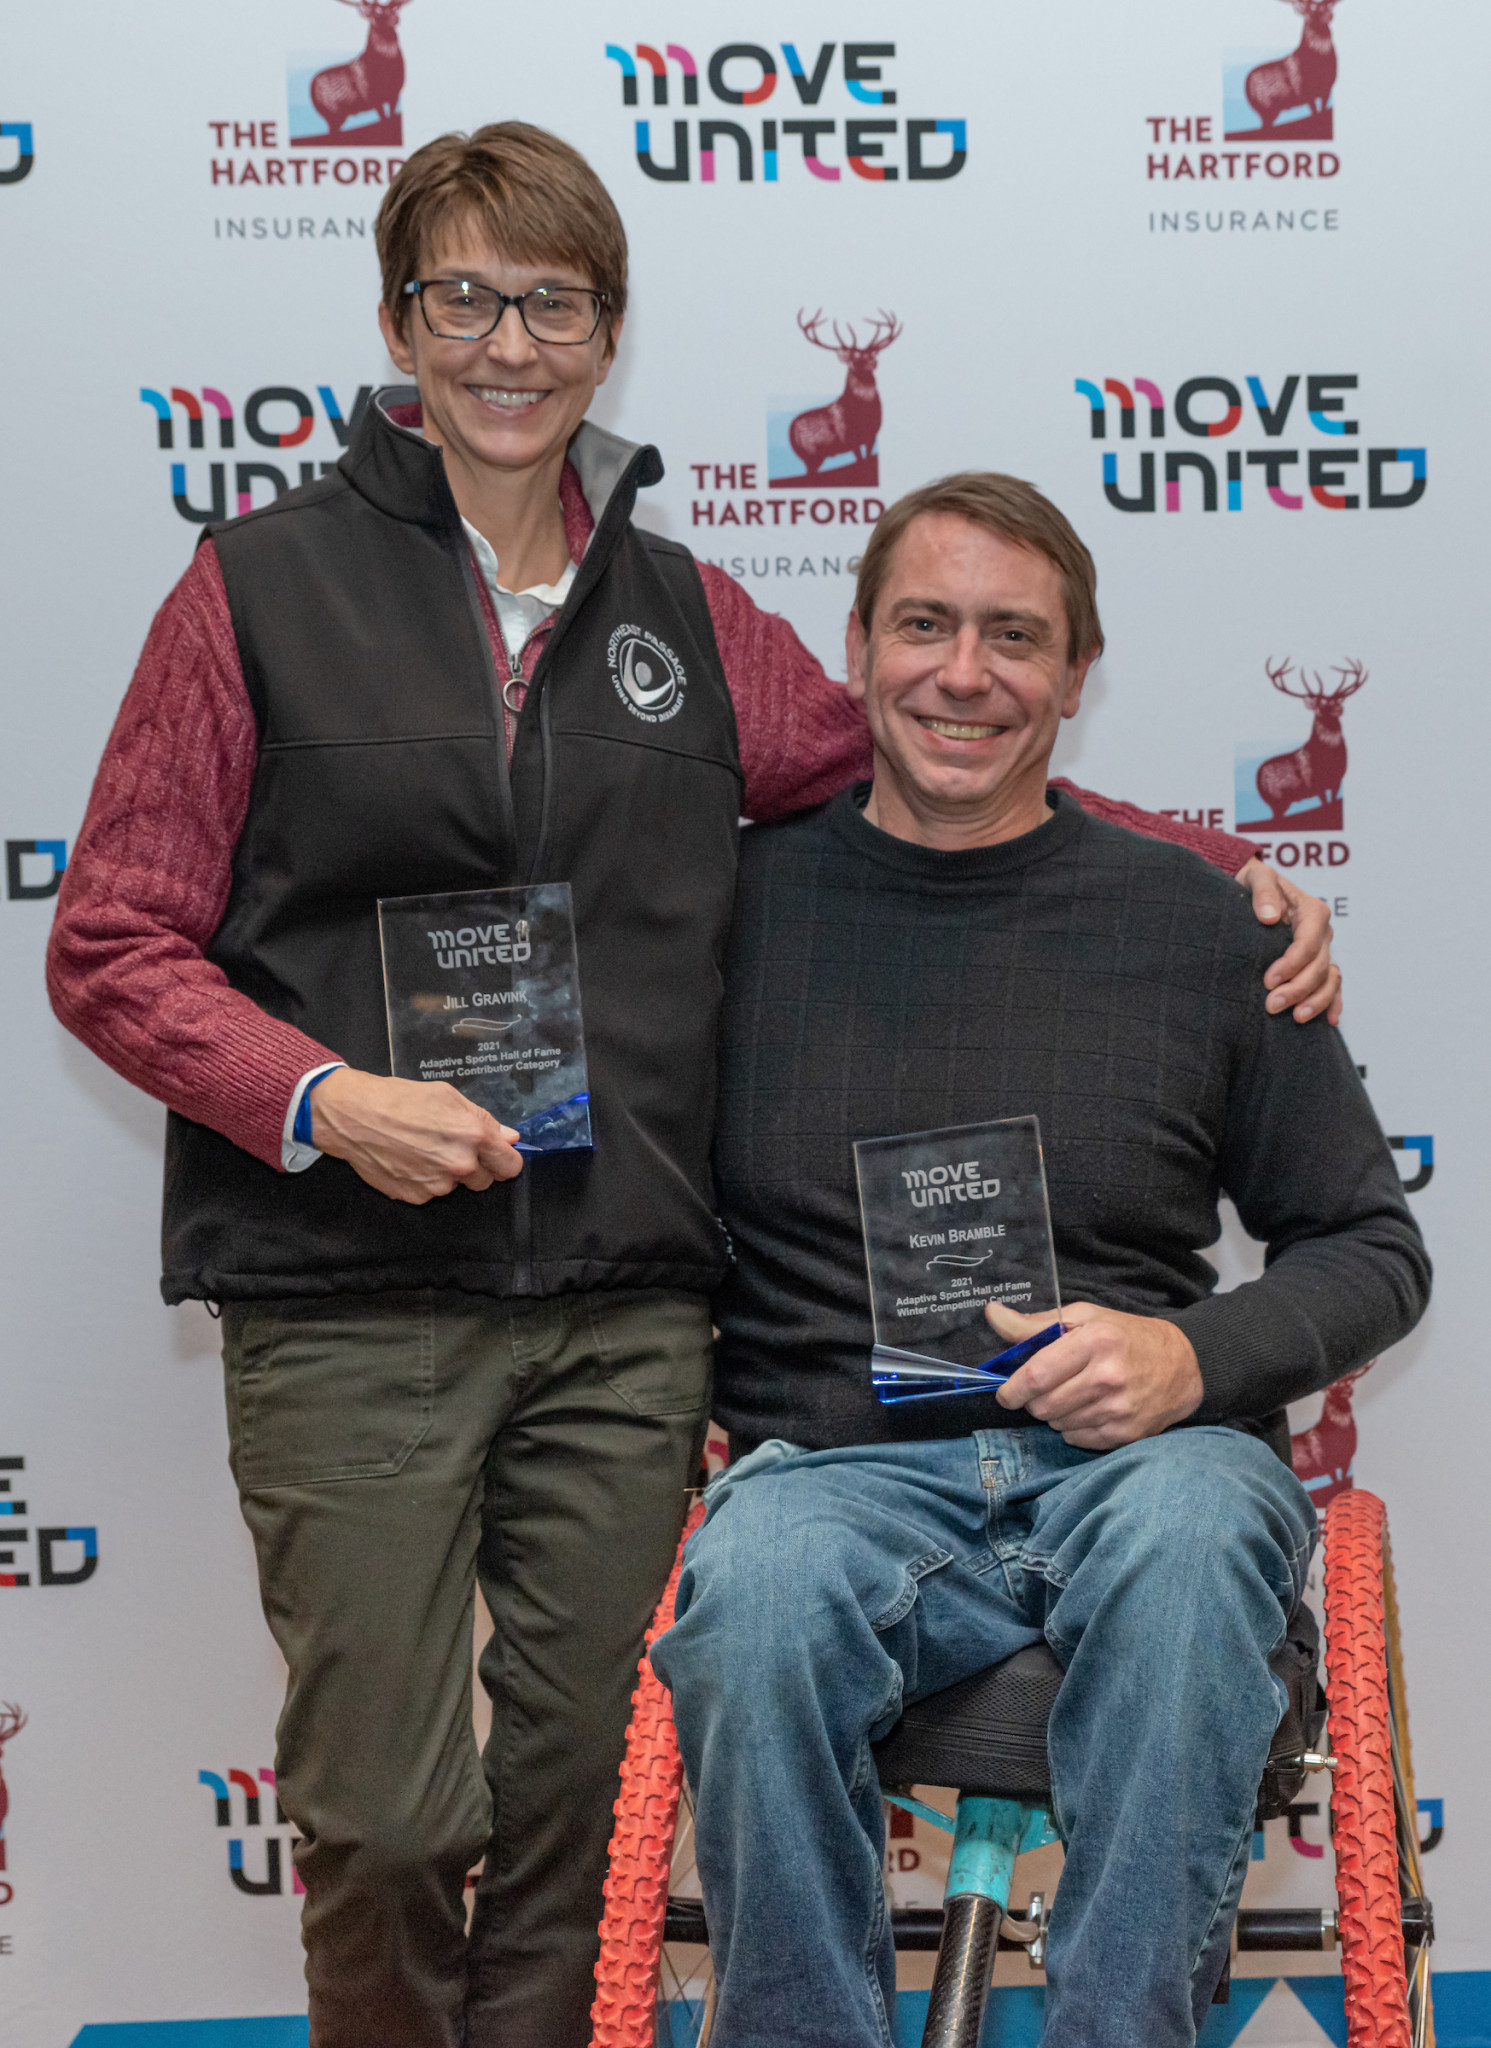 Jill Gravink, left, and two-time Paralympic champion Kevin Bramble, right, were the 2021 winter sport entrants to the National Adaptive Sports Hall of Fame ©Move United